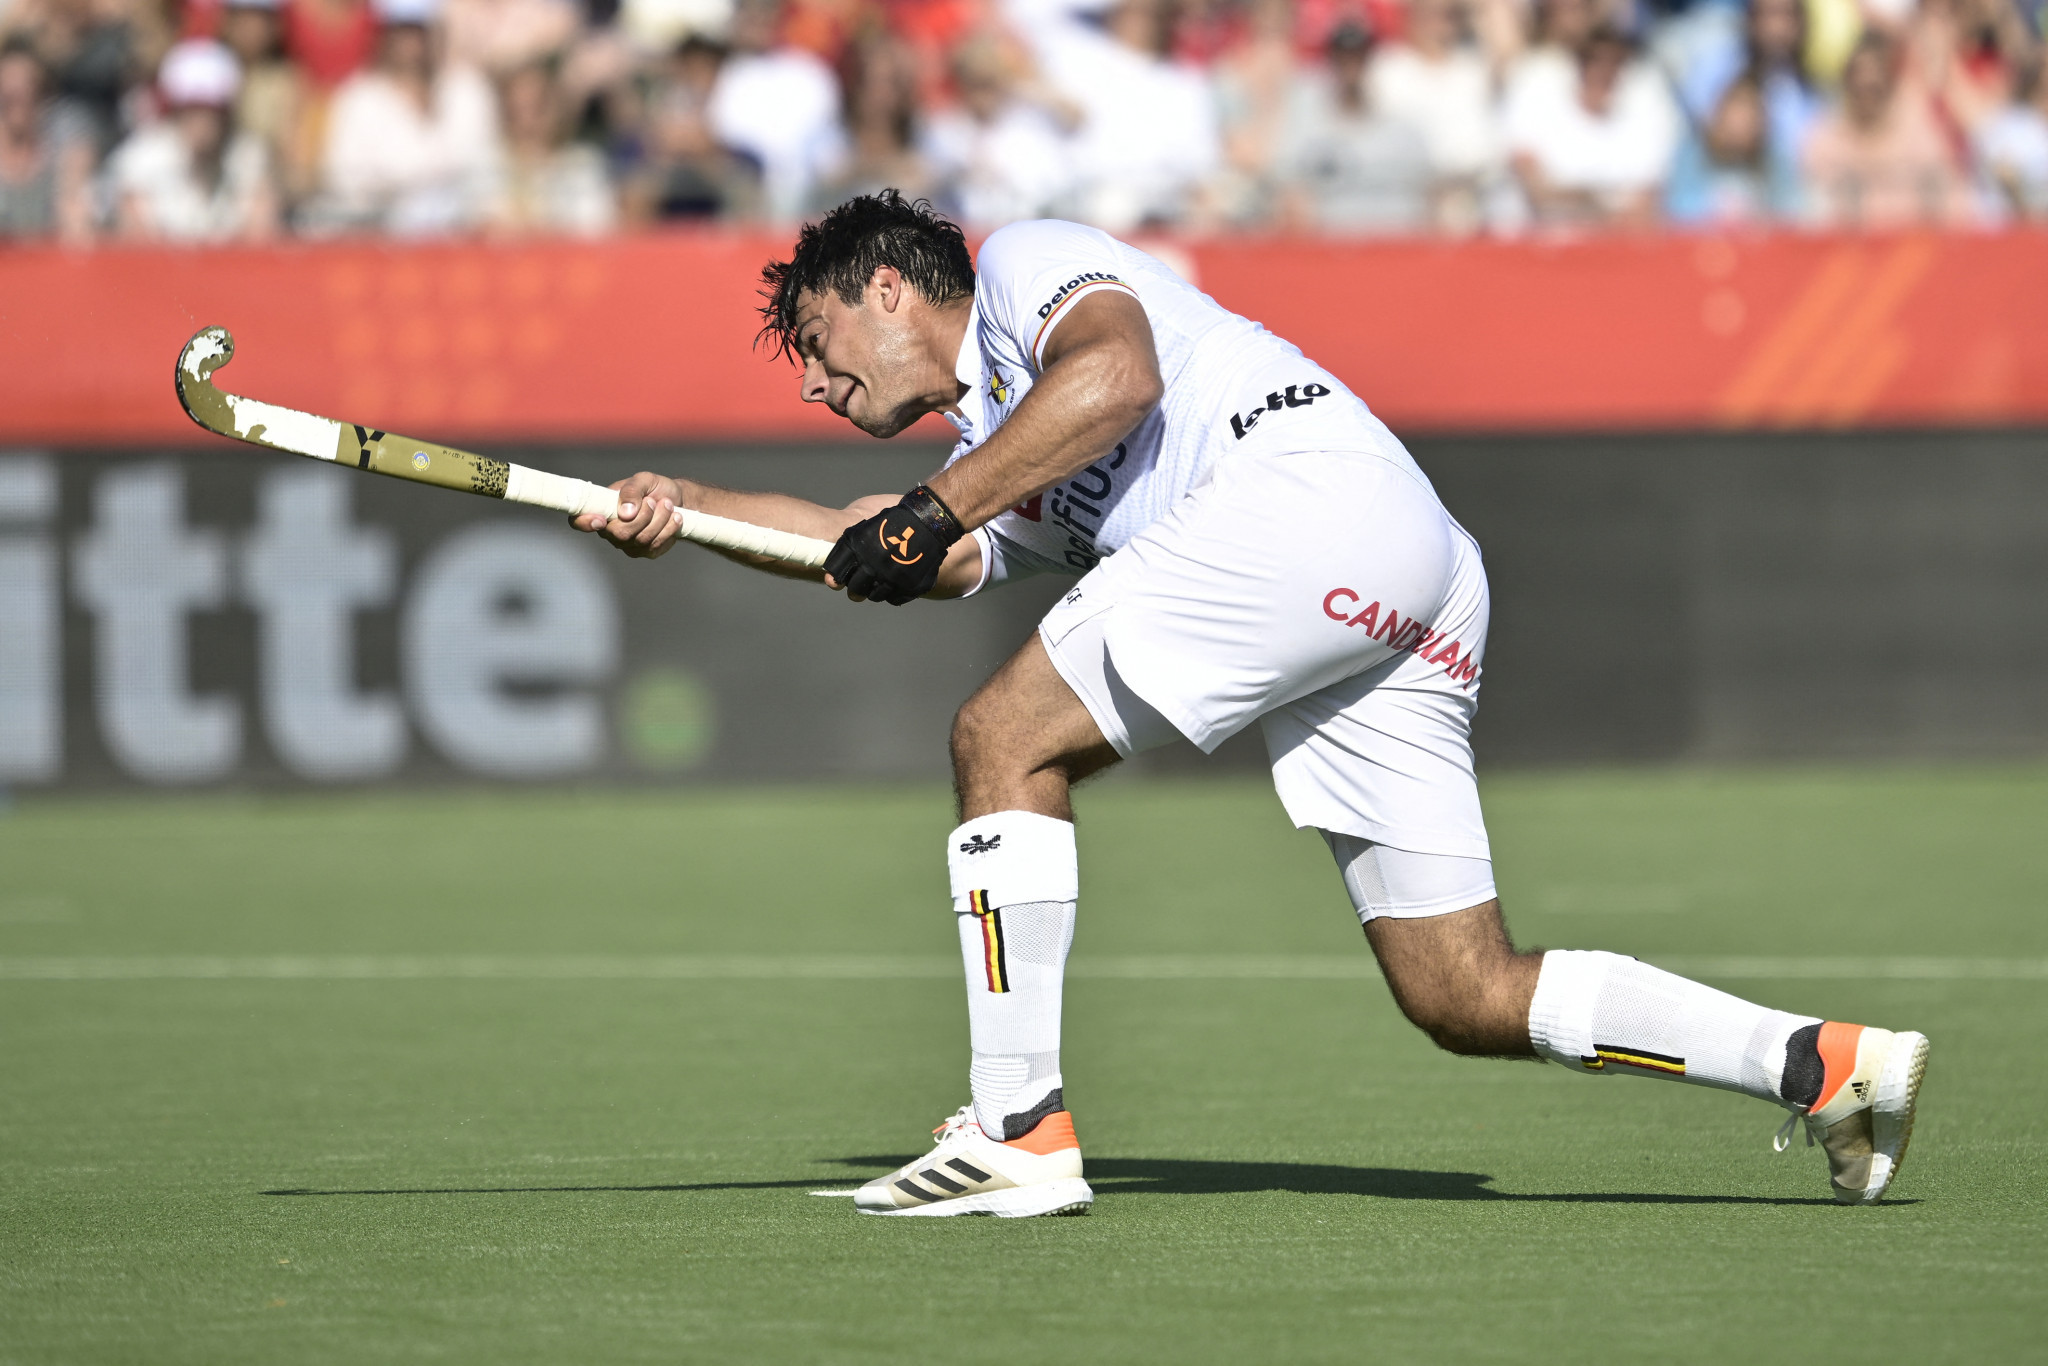 FIH Pro League closes in on its finale as five games take place in bumper day